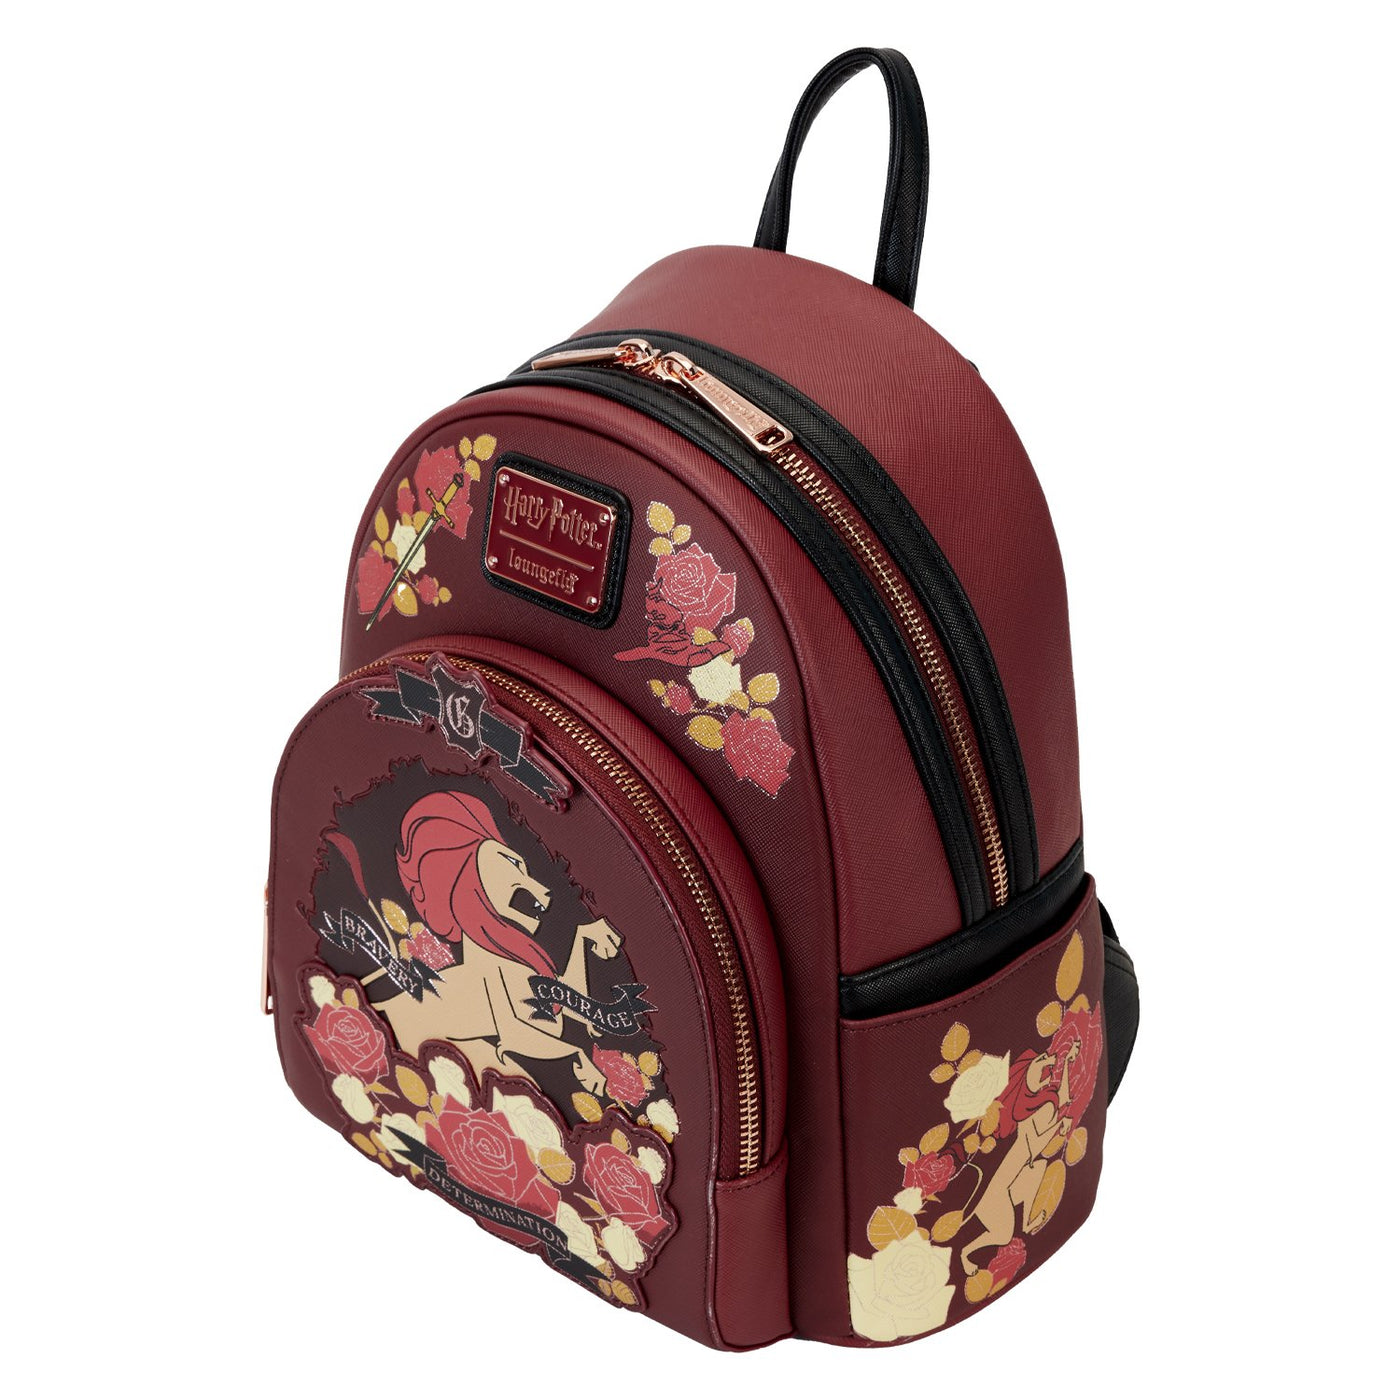 Loungefly Warner Brothers Harry Potter Gryffindor House Tattoo Mini Backpack - Top View